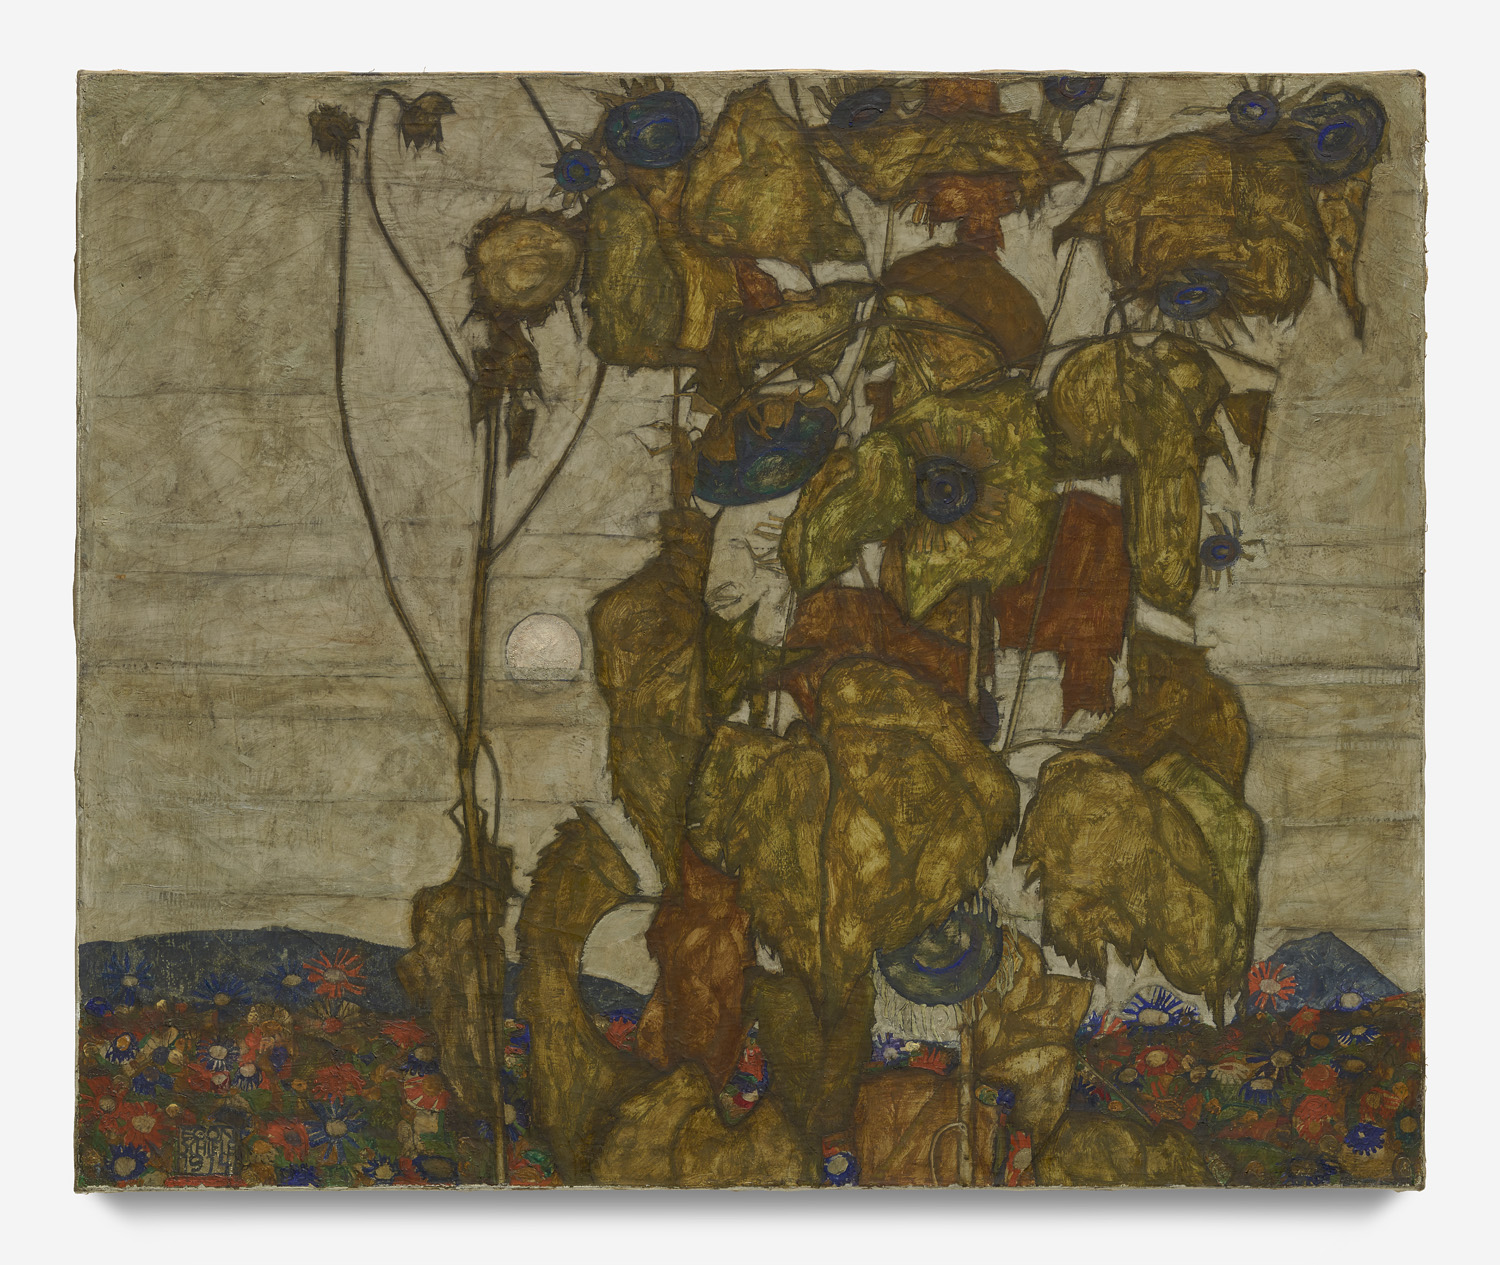 Egon Schiele, Autumn sun (Sunflowers), 1914, Private collection. Courtesy of Eykyn Maclean Picture: Courtesy of Eykyn Maclean